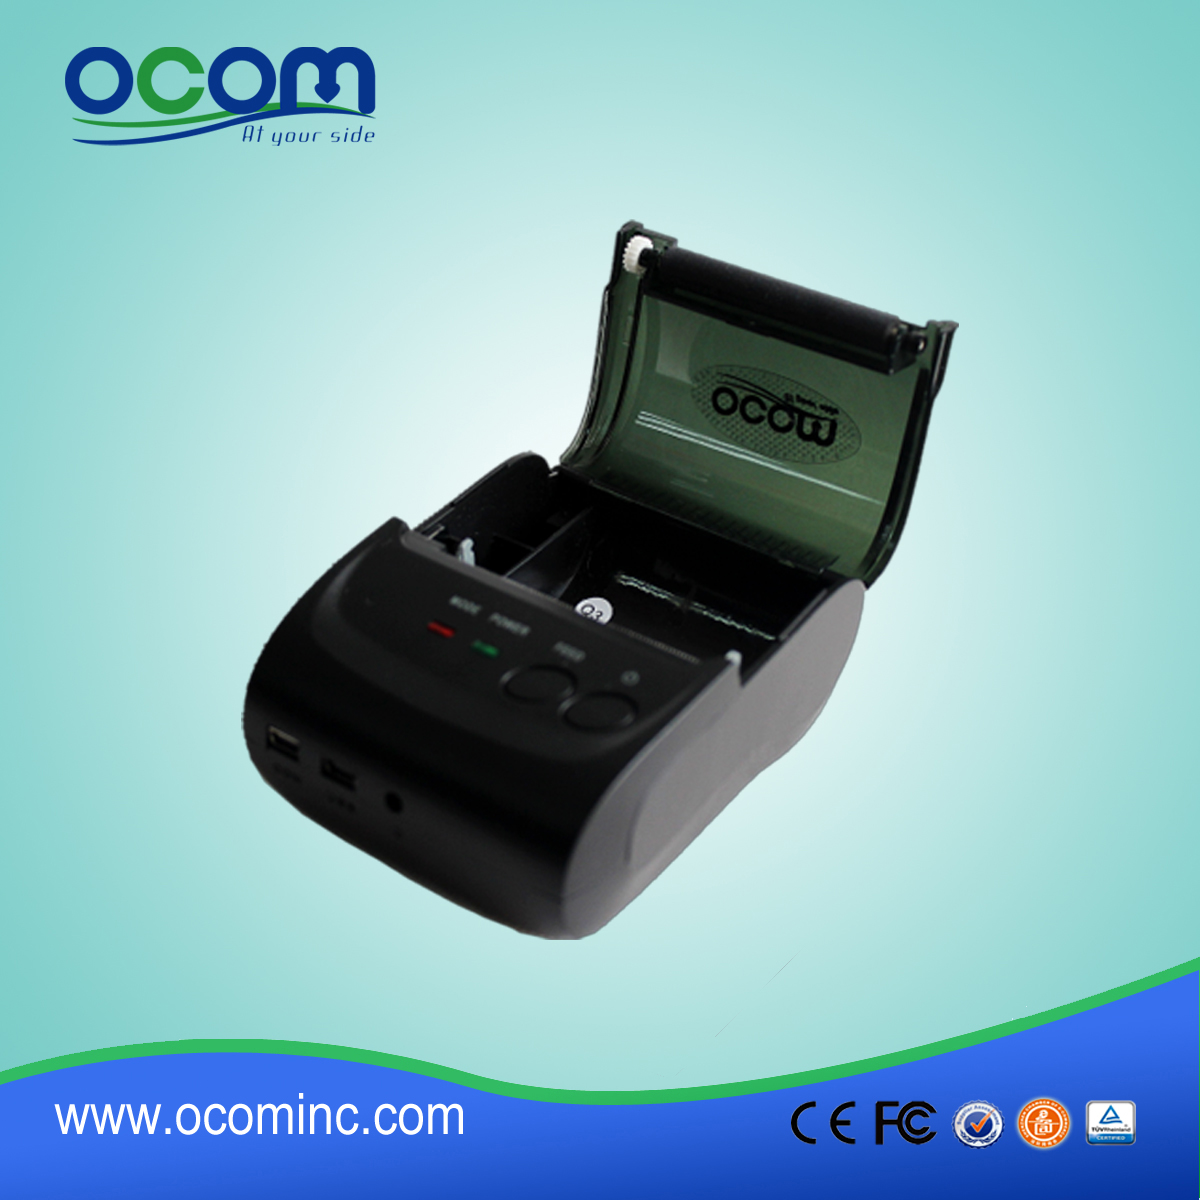 OCPP-M05: 2 "Handheld Battery Operated Android compatibel Bluetooth thermische printer